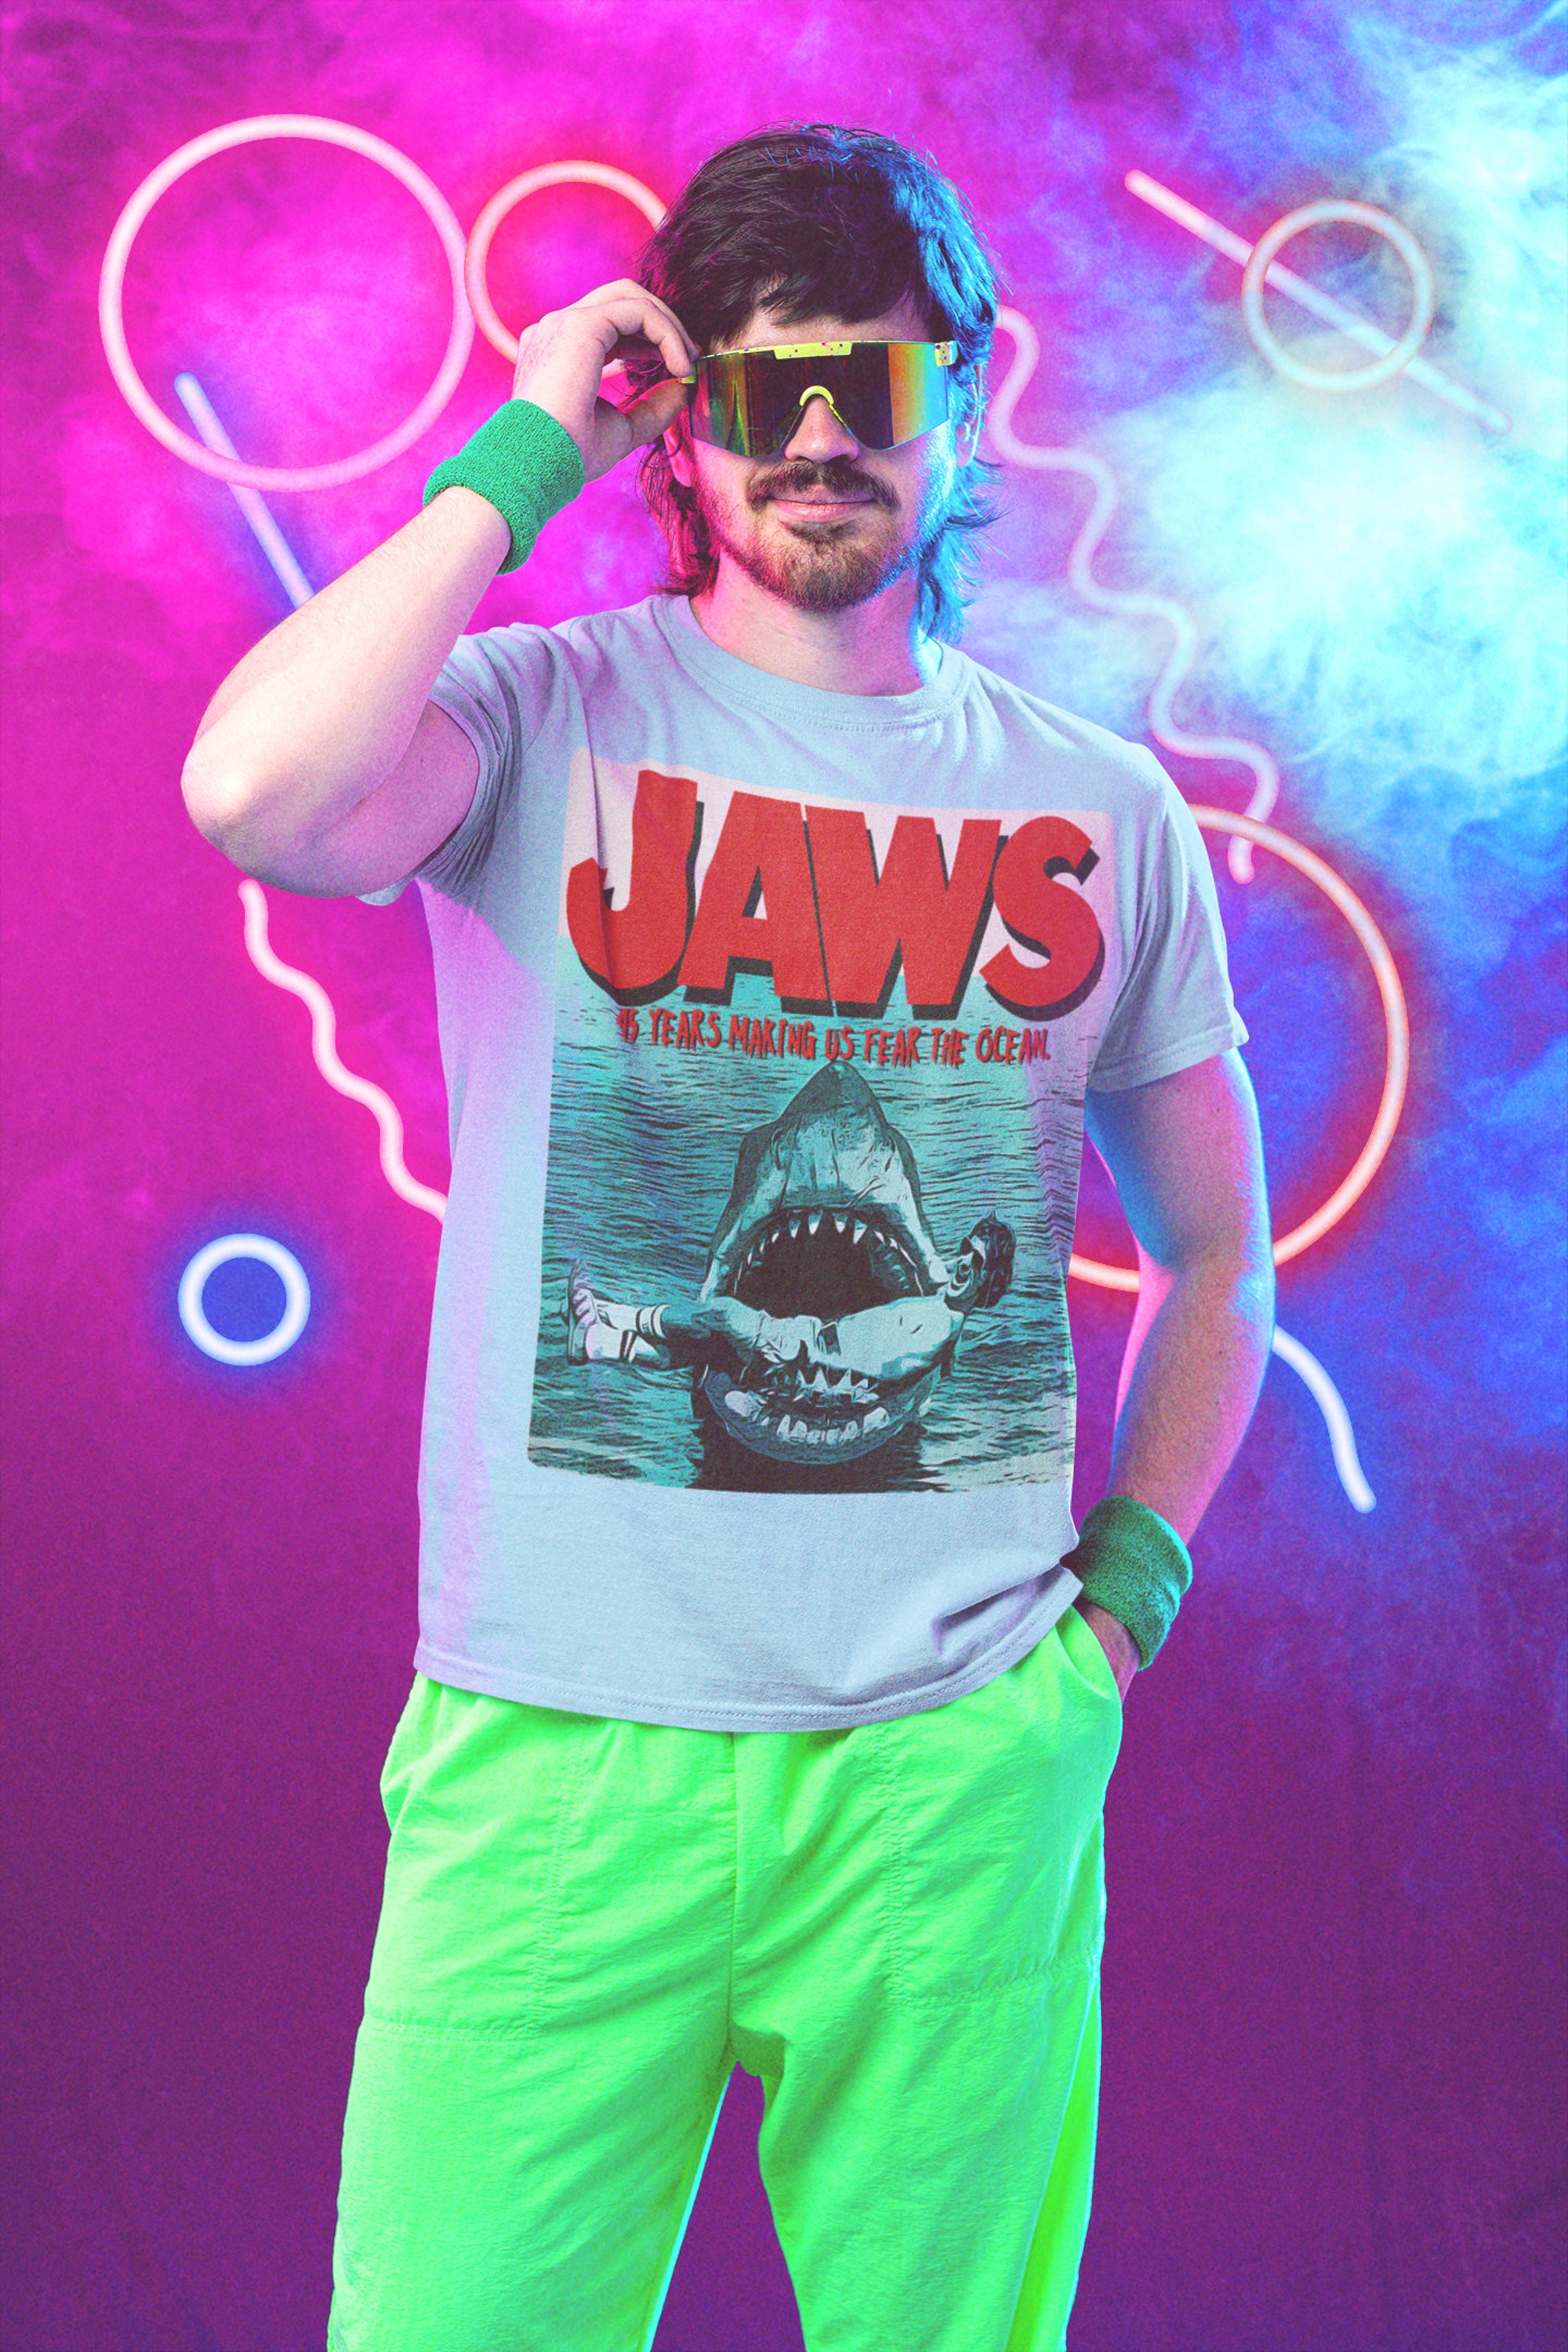 Discover Jaws Movie Soft T-Shirt, Jaws Poster T Shirt, Horror Movie Fan Shirt, 70's Movie Nostalgia